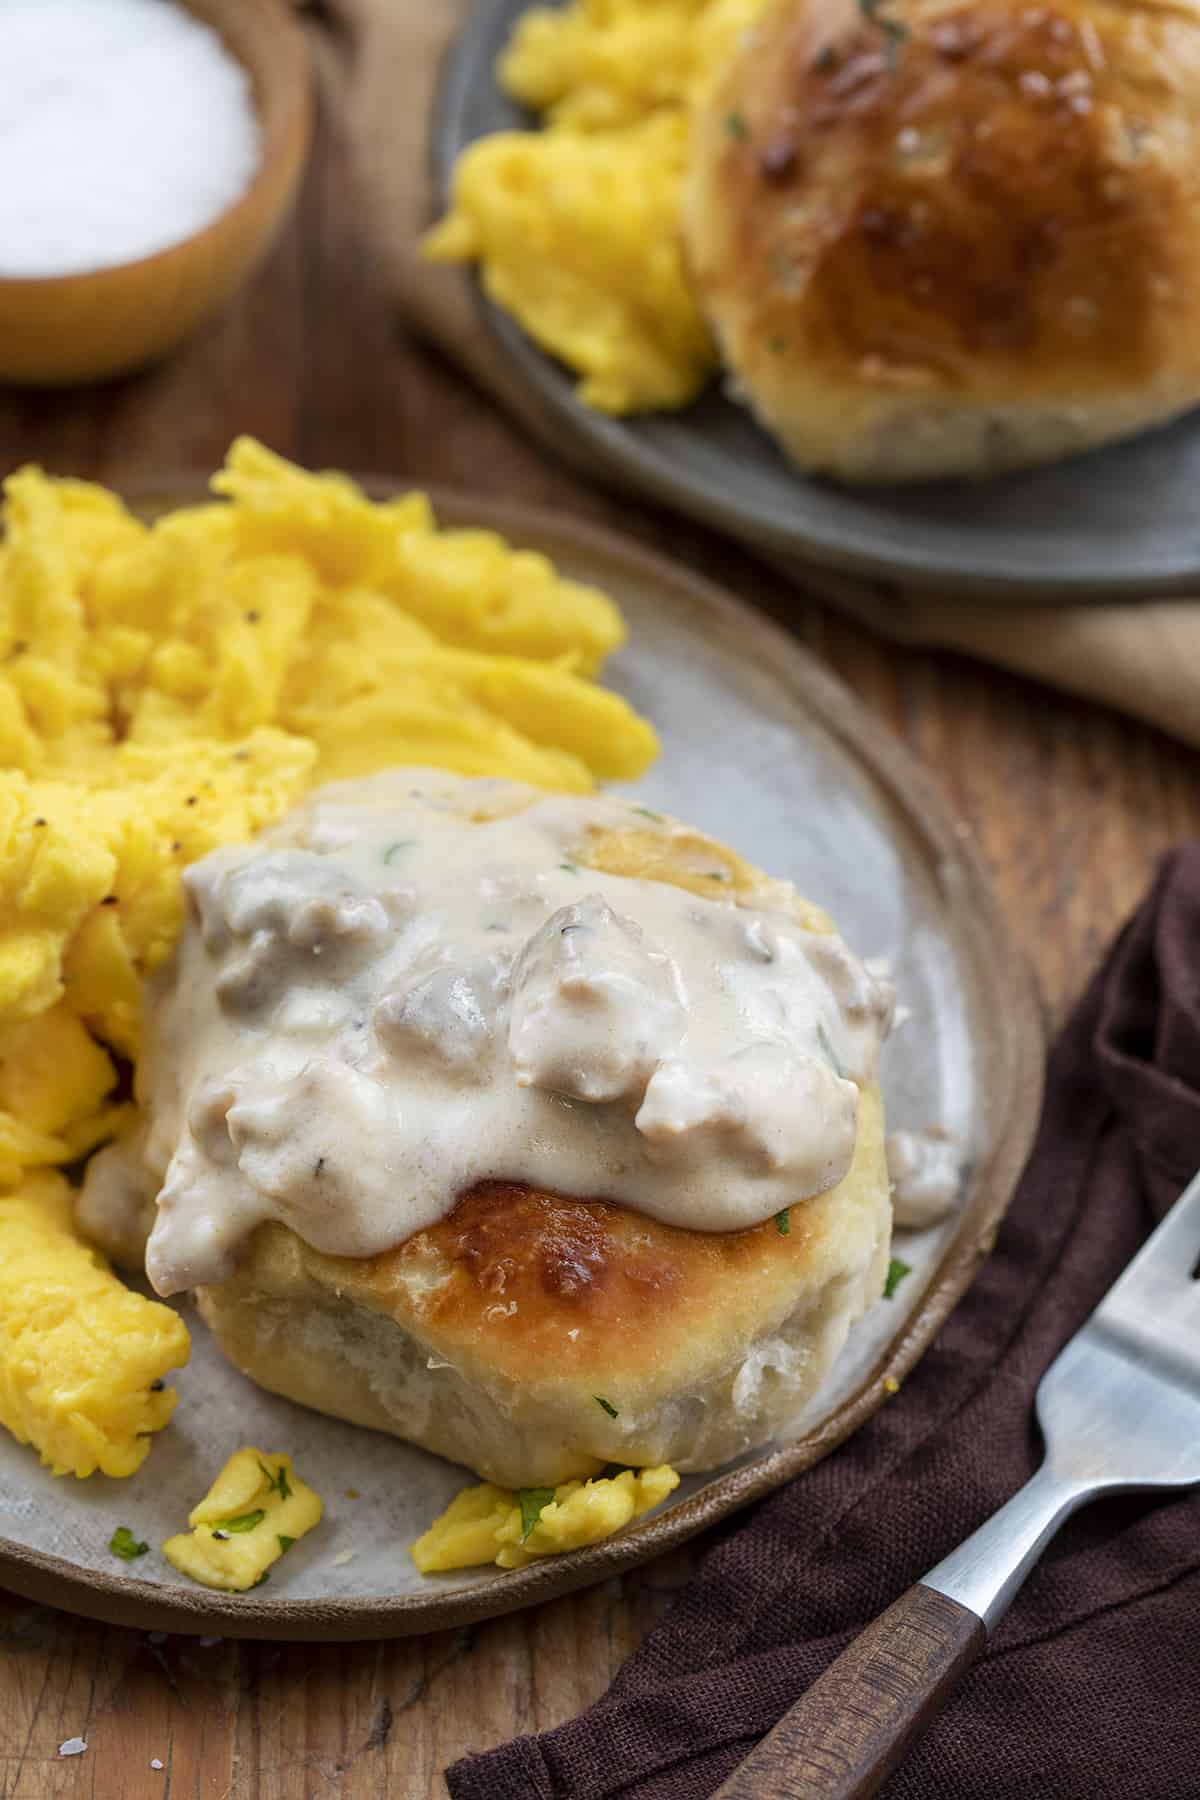 Biscuit and Gravy Bomb on a Plate with Sausage Gravy on top and Scrambled Eggs. Breakfast, Breakfast Recipes, Biscuits and Gravy, How to Make Sausage Gravy, Canned Biscuit Recipes, Biscuits and Gravy hand Pies, Breakfast Bombs, Gravy Inside Biscuit, Breakfast Ideas for Kids, Easy Breakfast for School Mornings, i am homesteader, iamhomesteader